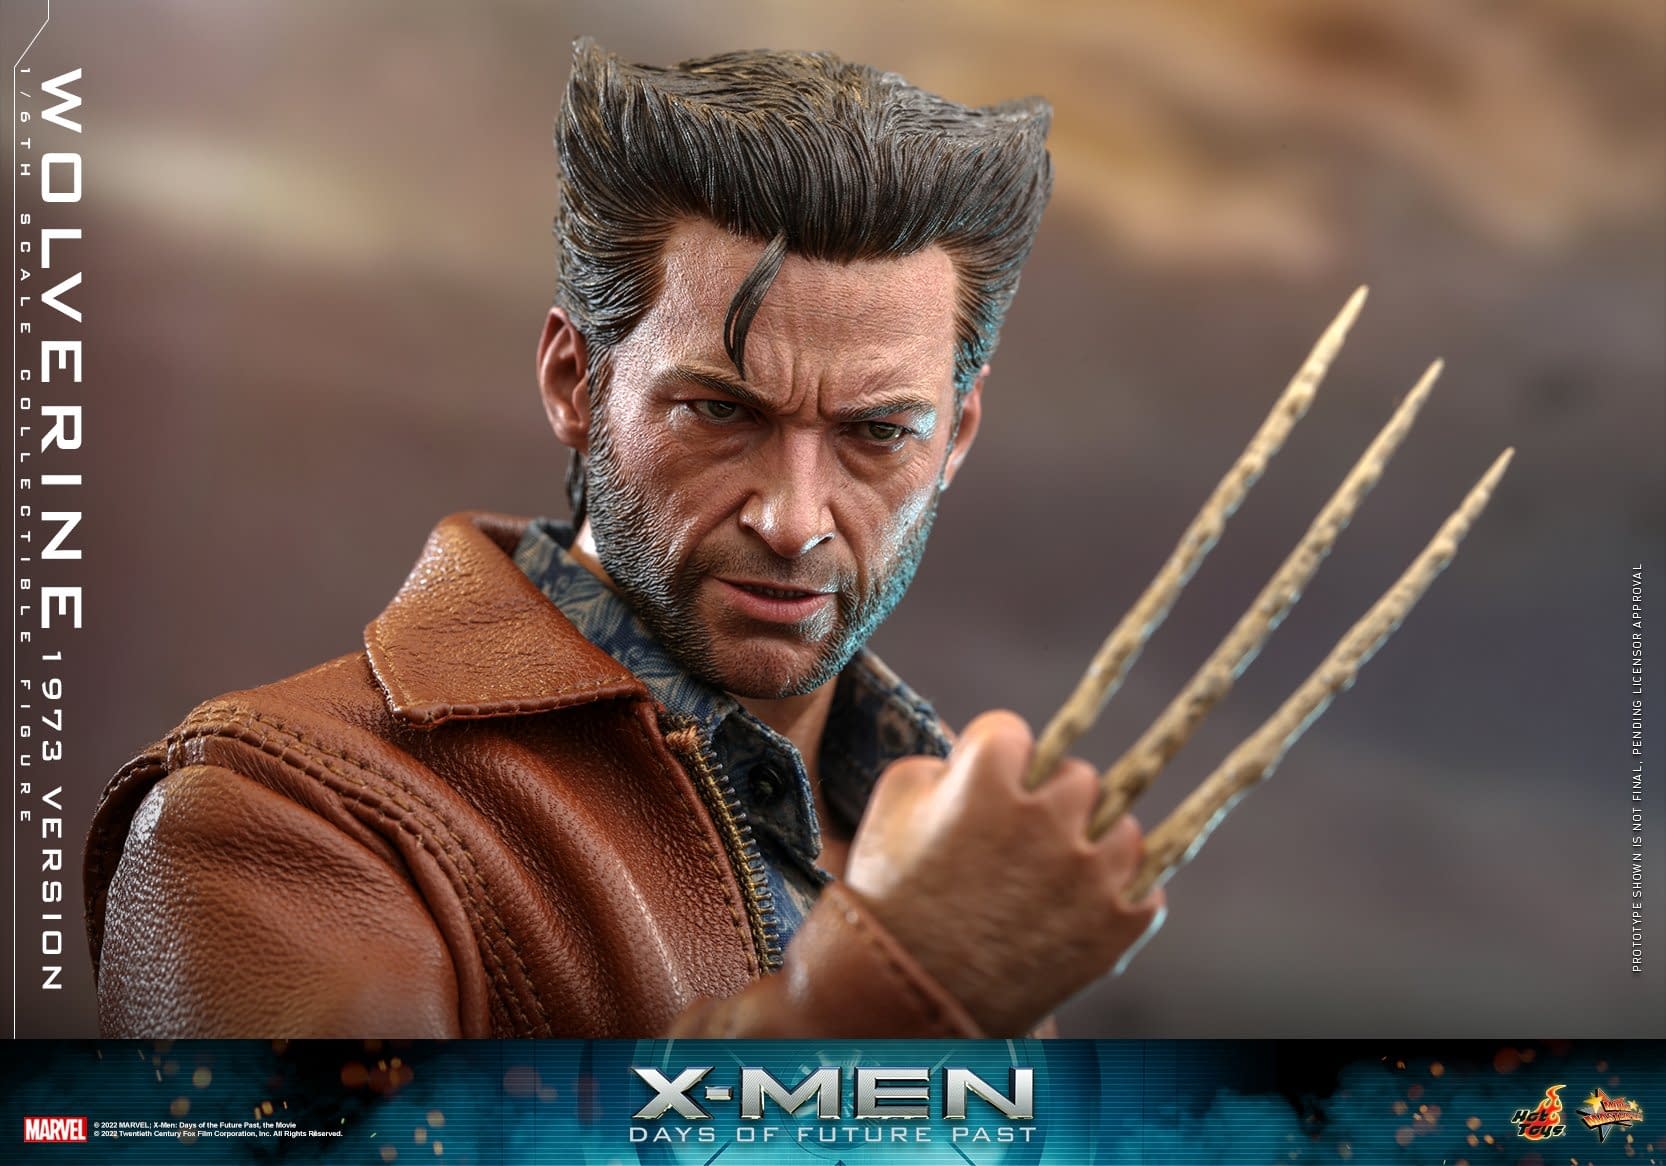 X-Men: Days of Future Past 1973 Wolverine Figure Debuts from Hot Toys 